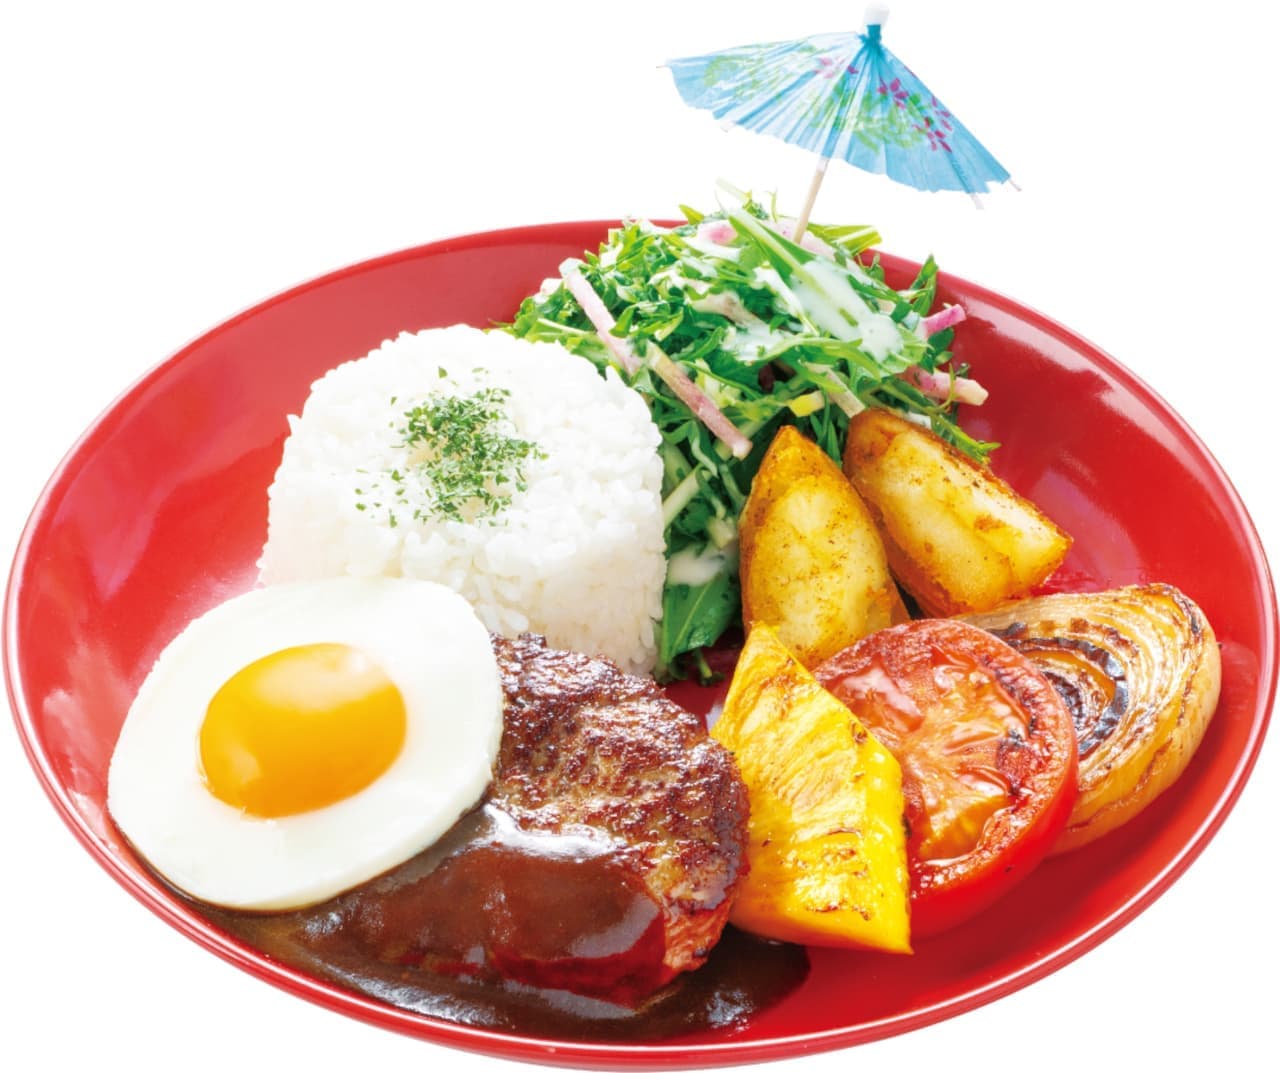 Big Boy "Loco Moco Plate with hand-kneaded hamburger steak" and "Open-flame grilled frizzy chicken plate